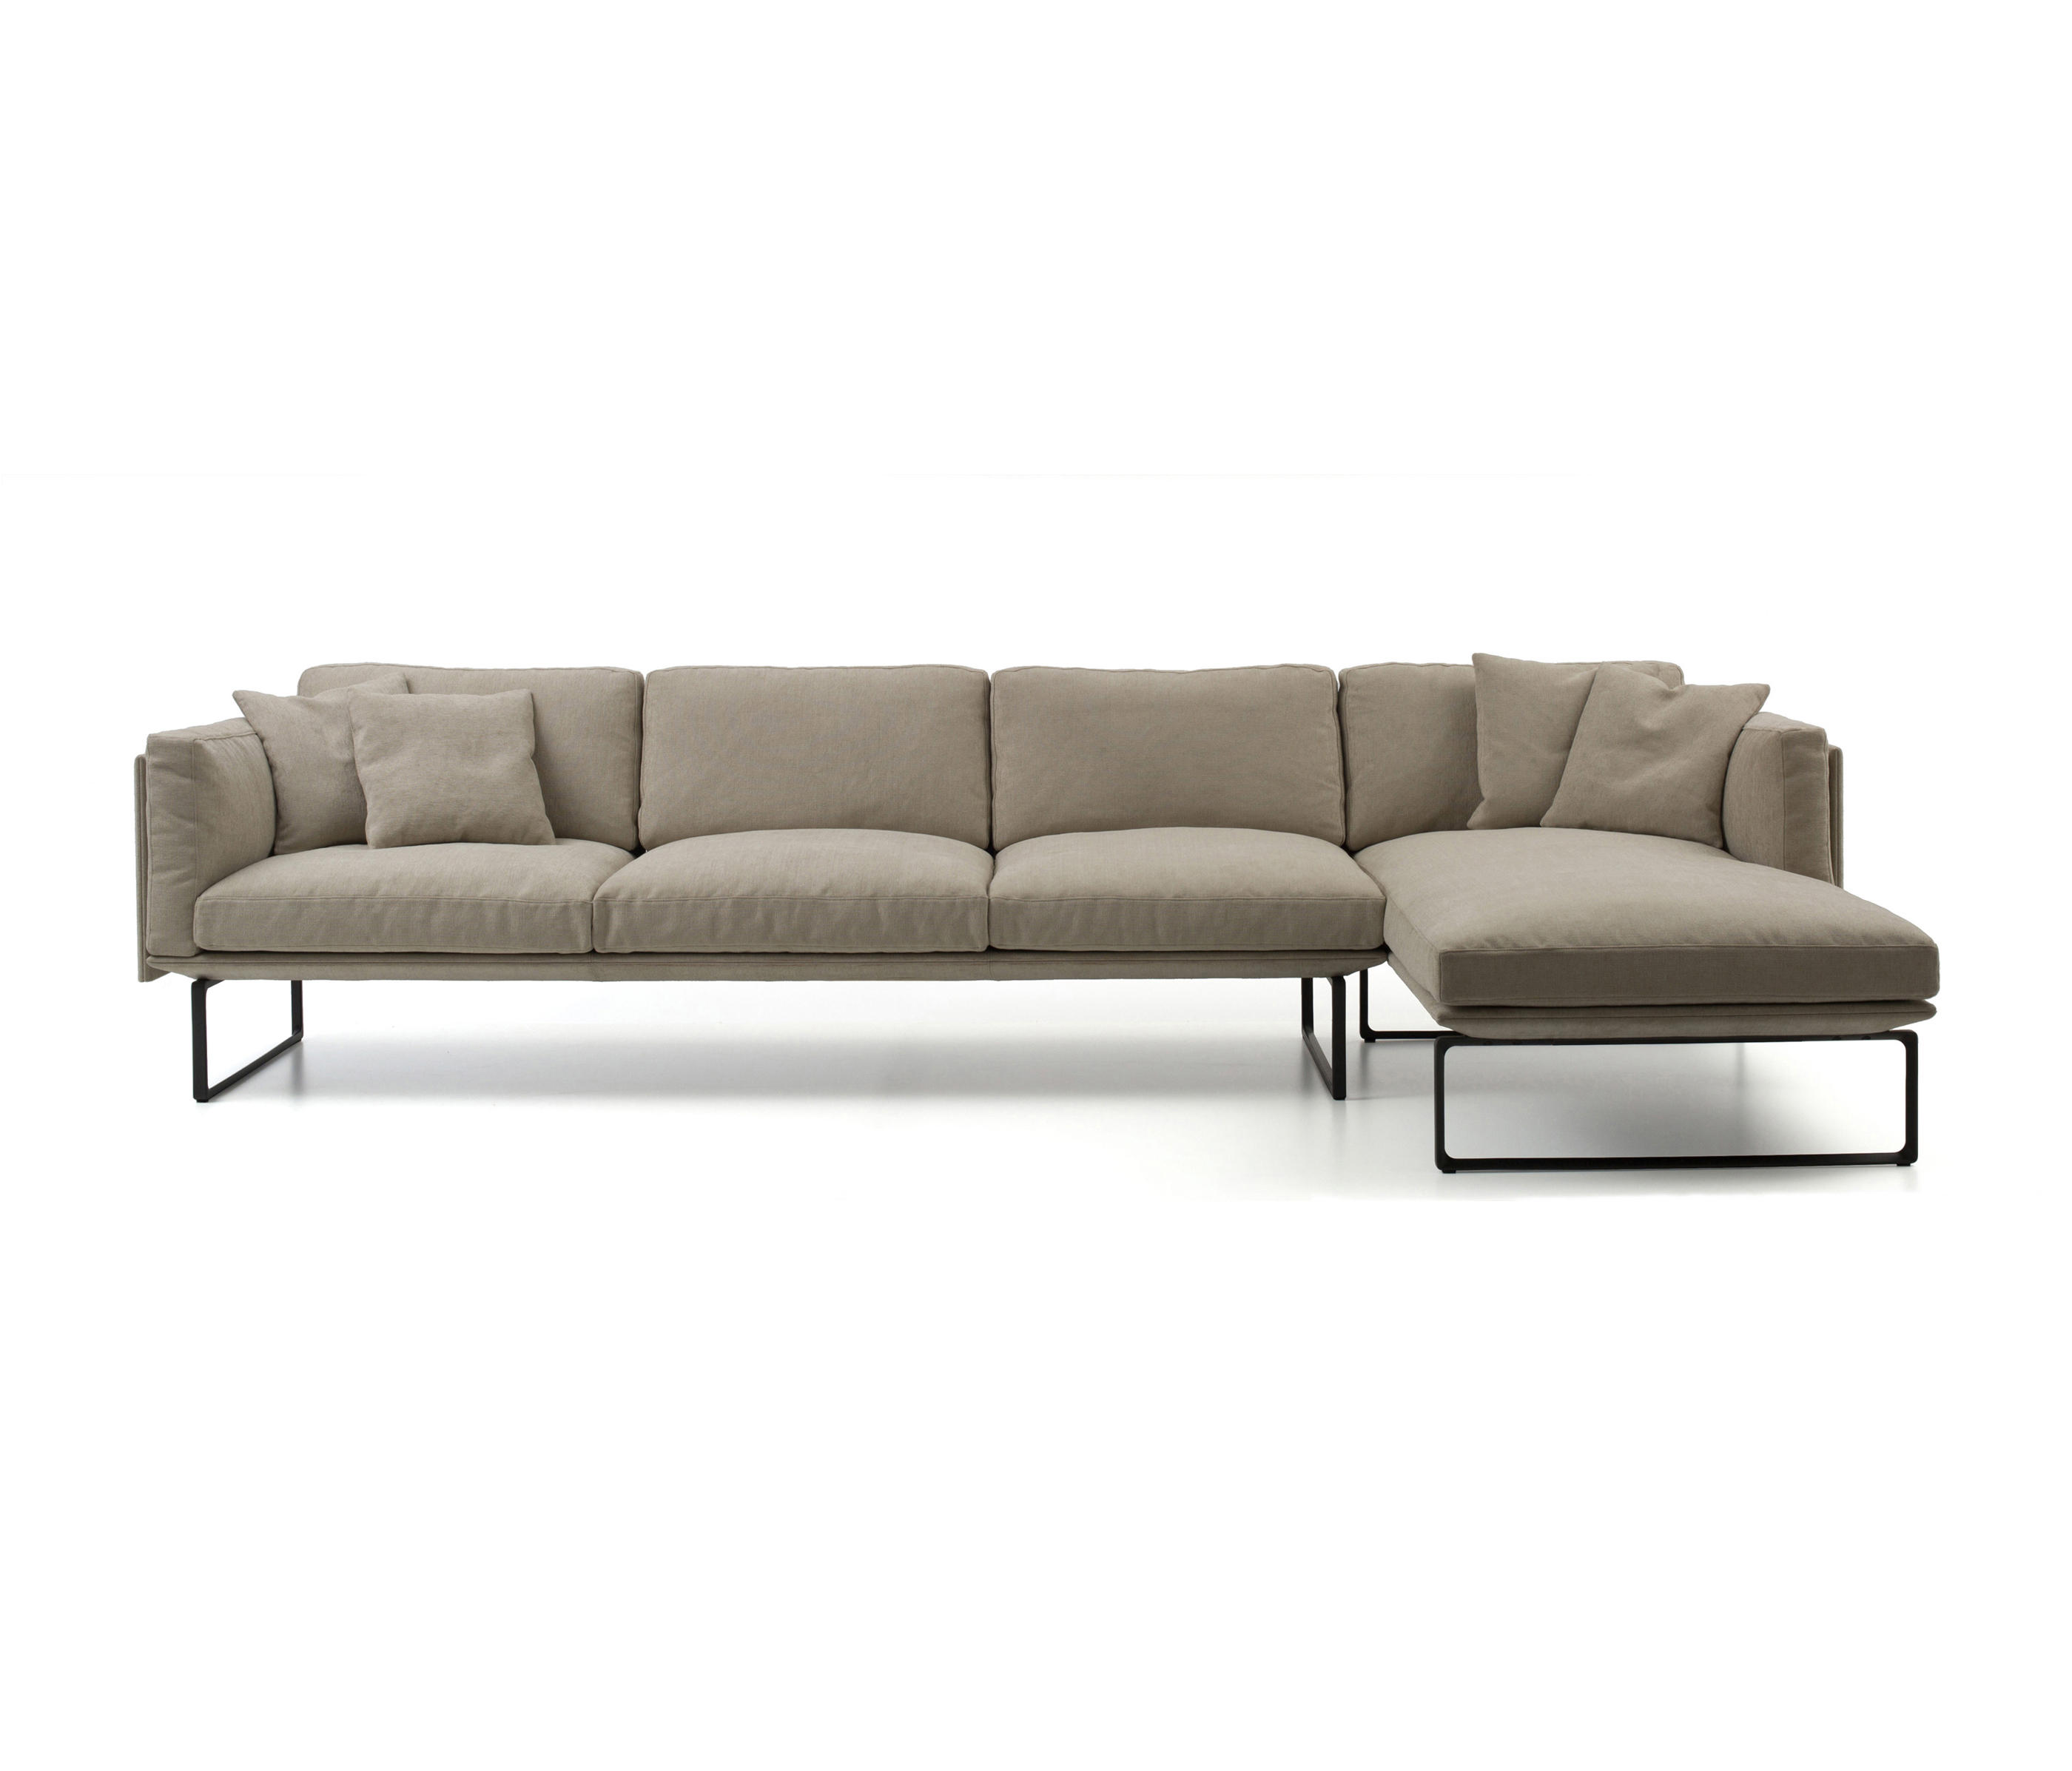 202 203 8 Sofas From Cassina Architonic